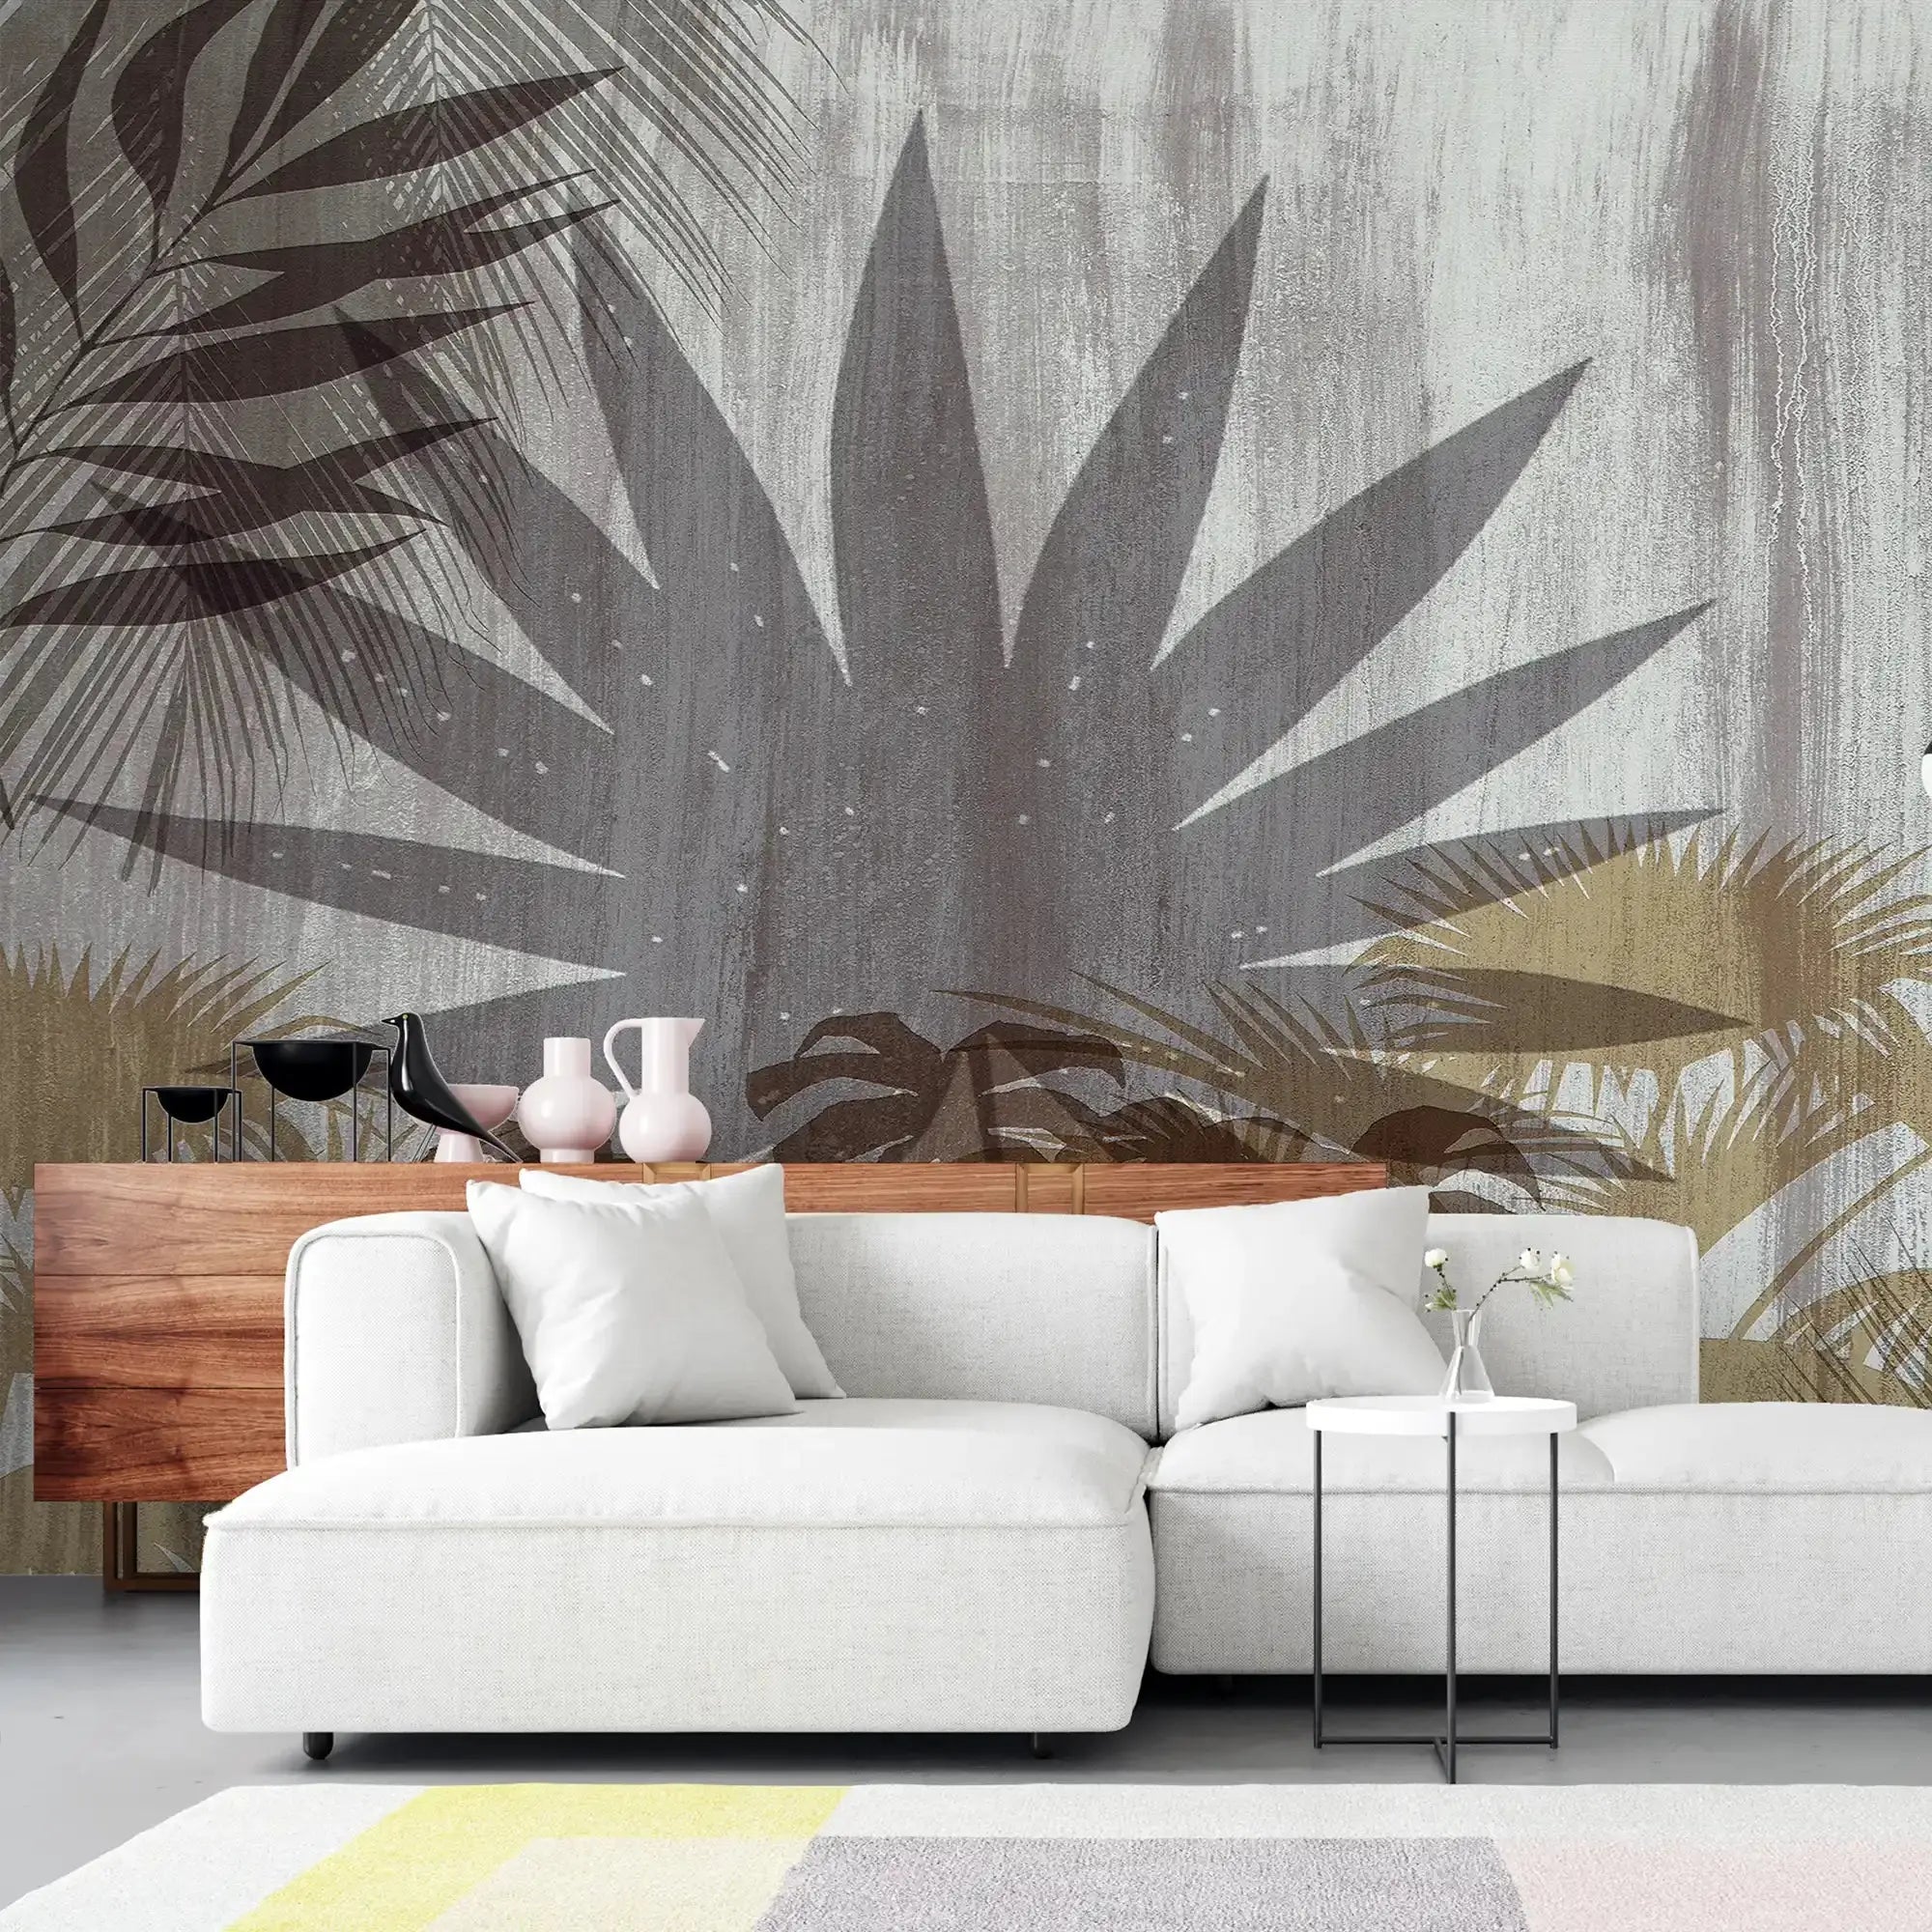 3077-B / Botanical Wall Mural: Peel and Stick Wallpaper with Wild Floral and Plant Motif - Artevella